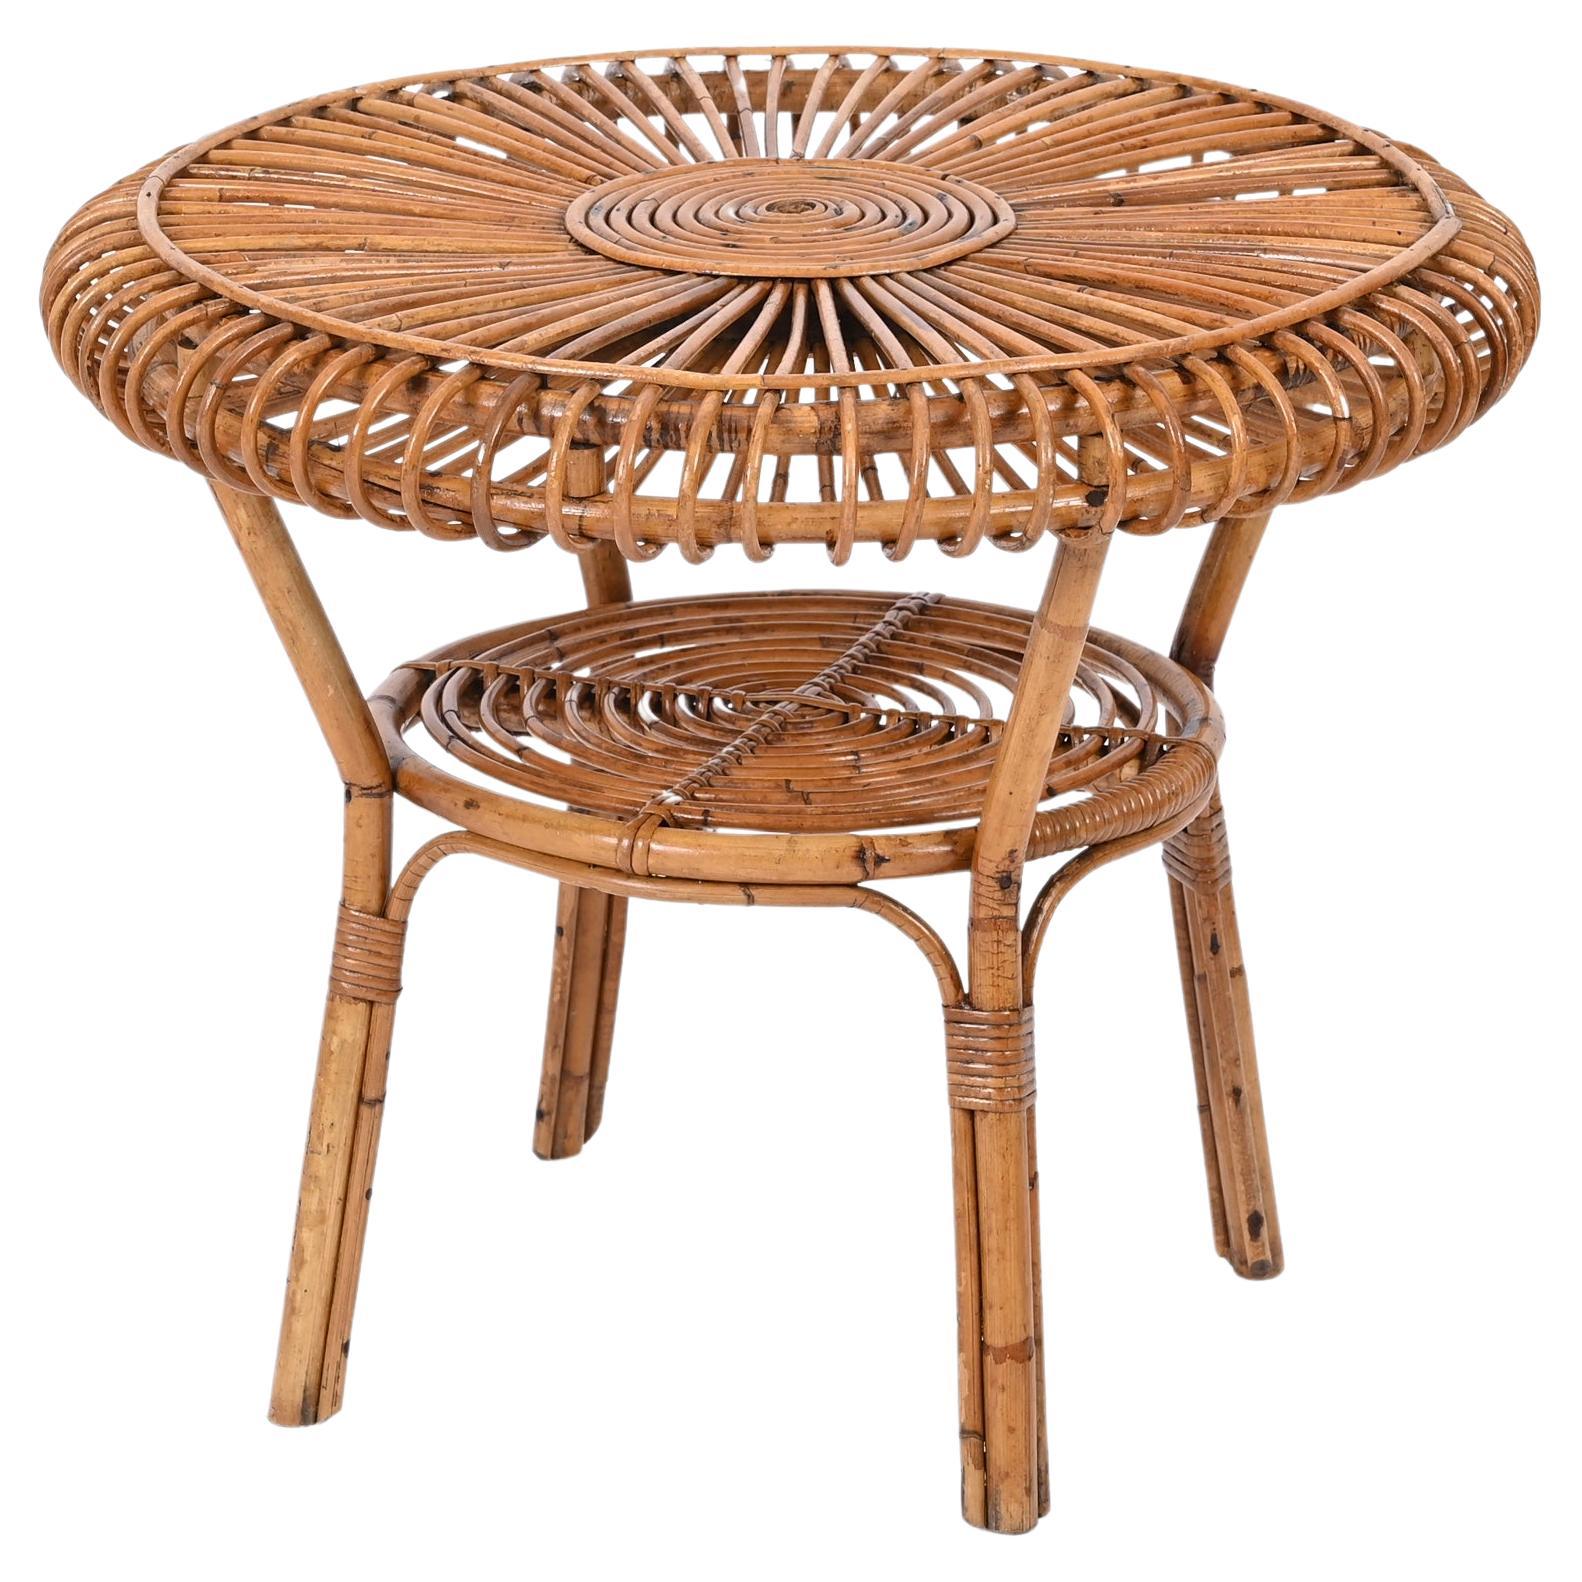 MidCentury Italian Round Coffee Table in Rattan and Bamboo, Italy 1960s For Sale